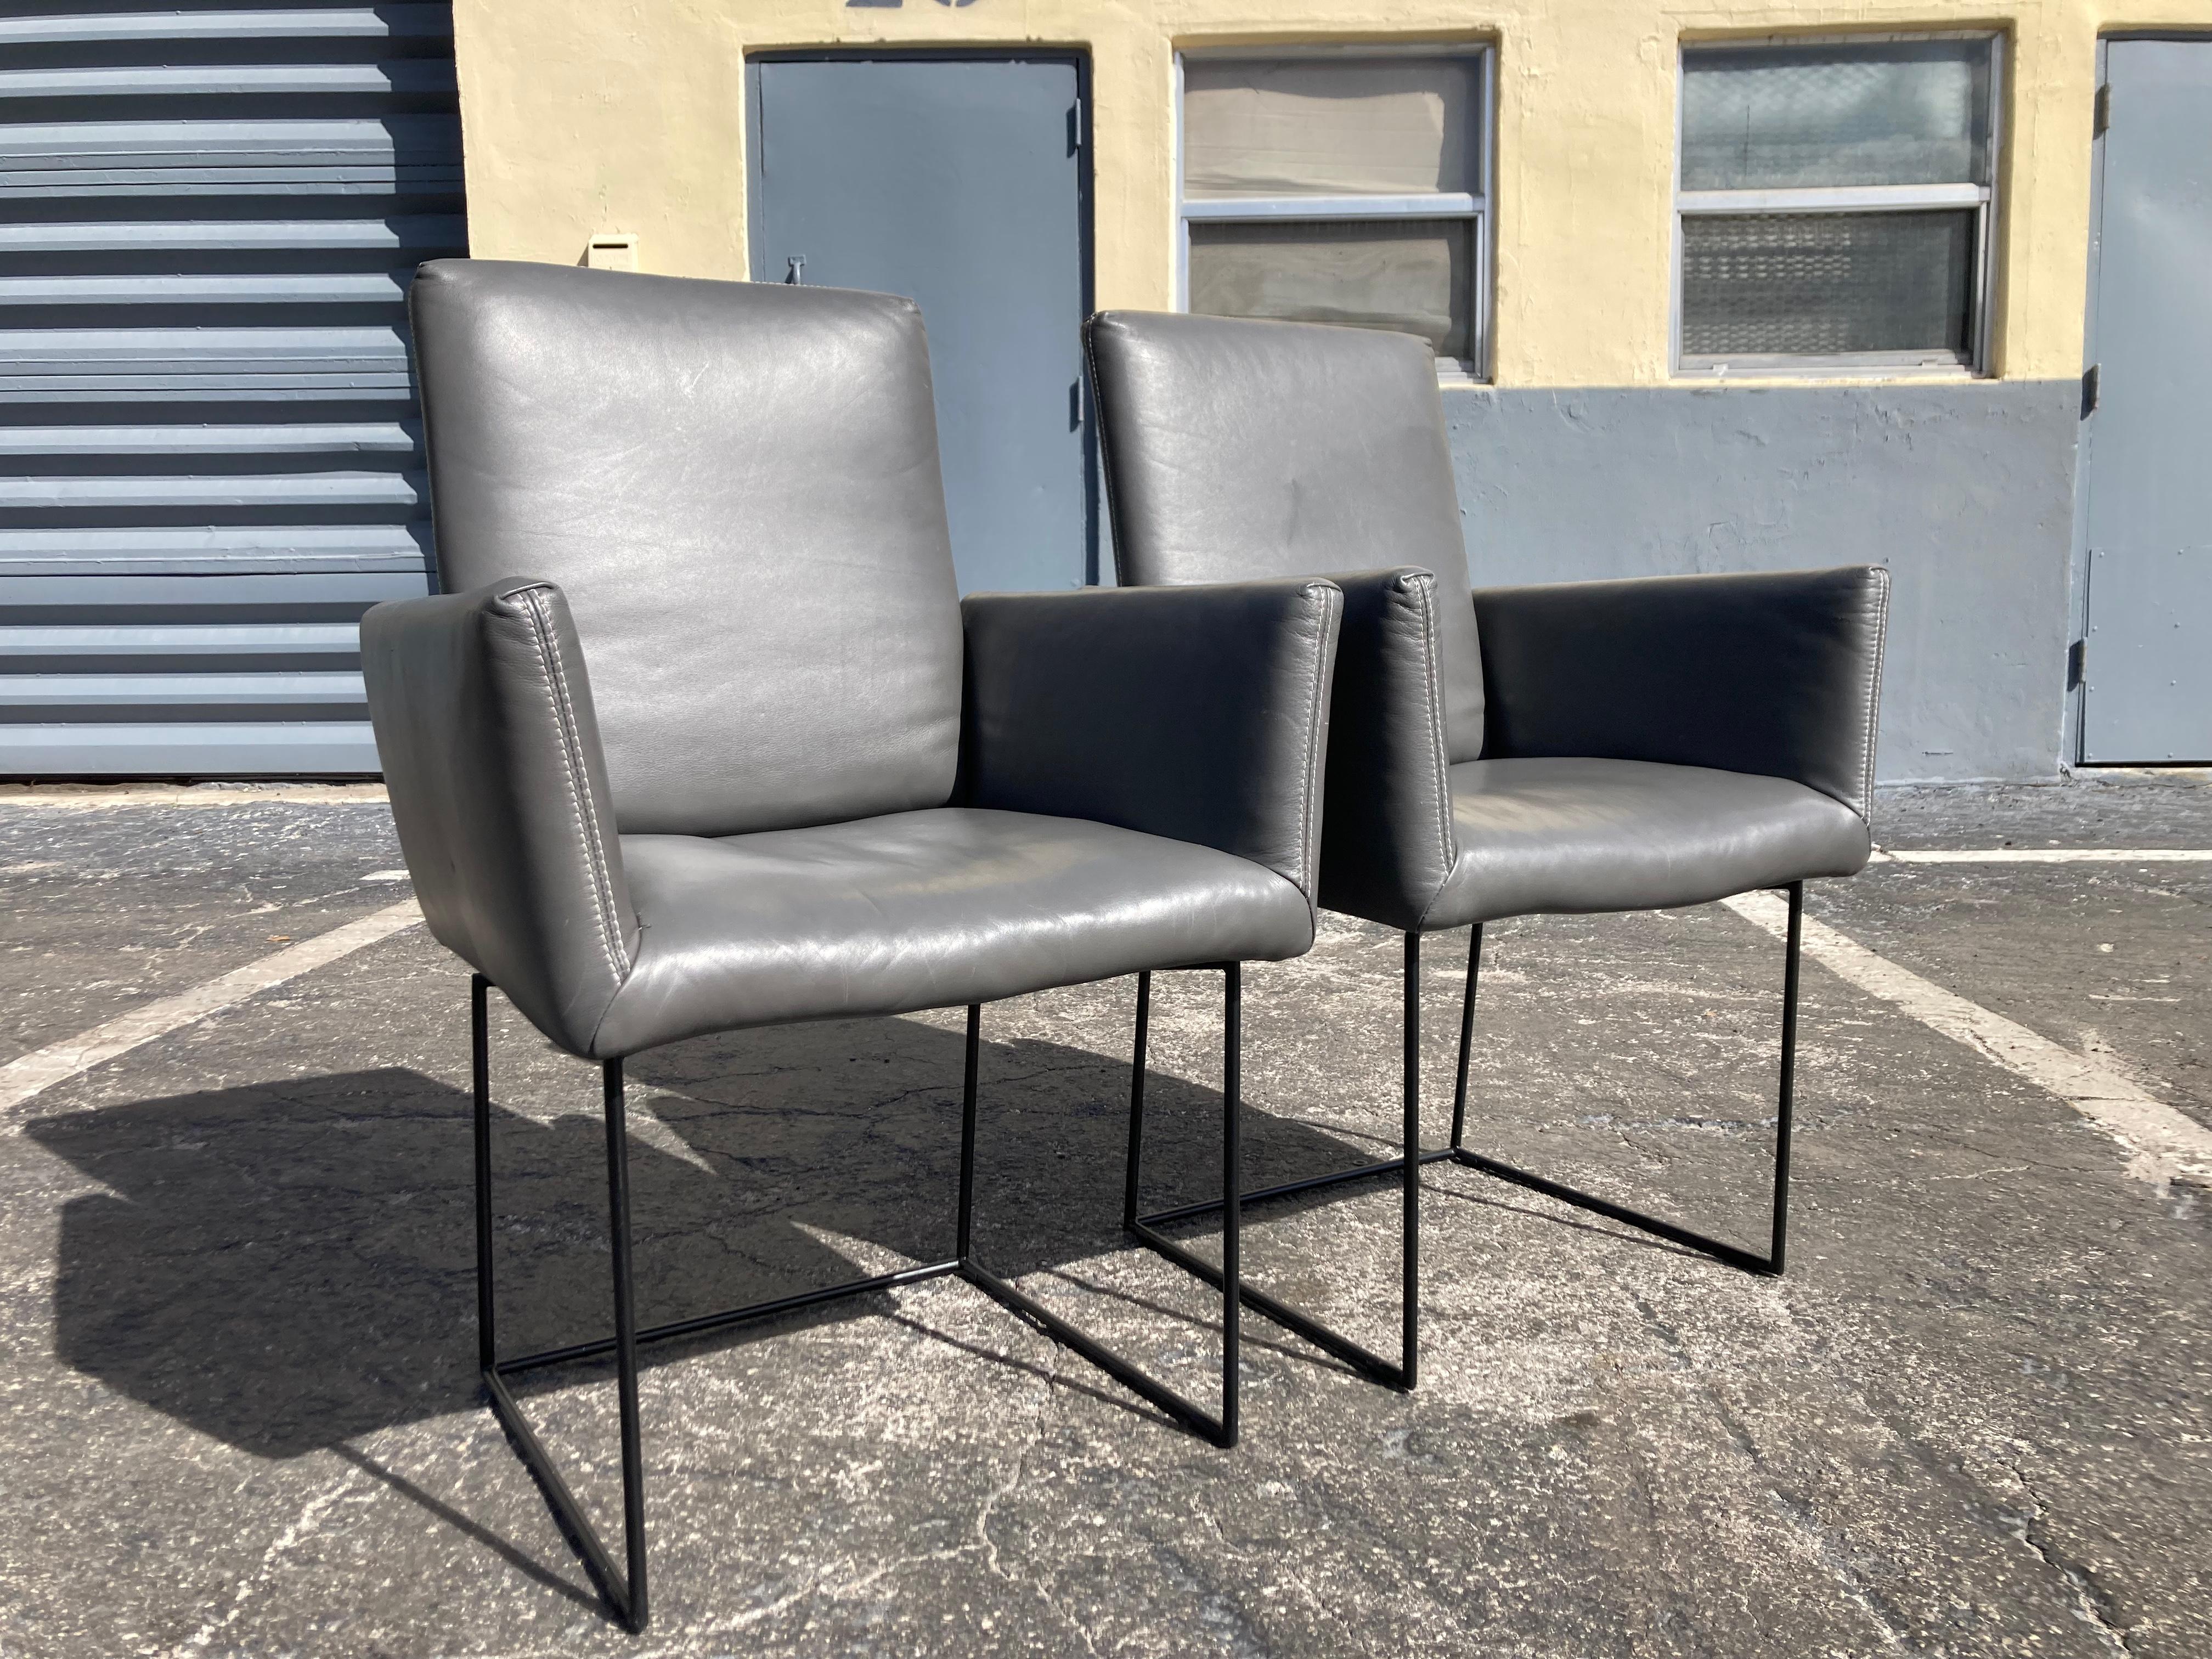 Pair Leather Arm Chairs Designed by KURT BEIER & KATI QUINGER for Bullfrog  In Good Condition For Sale In Miami, FL